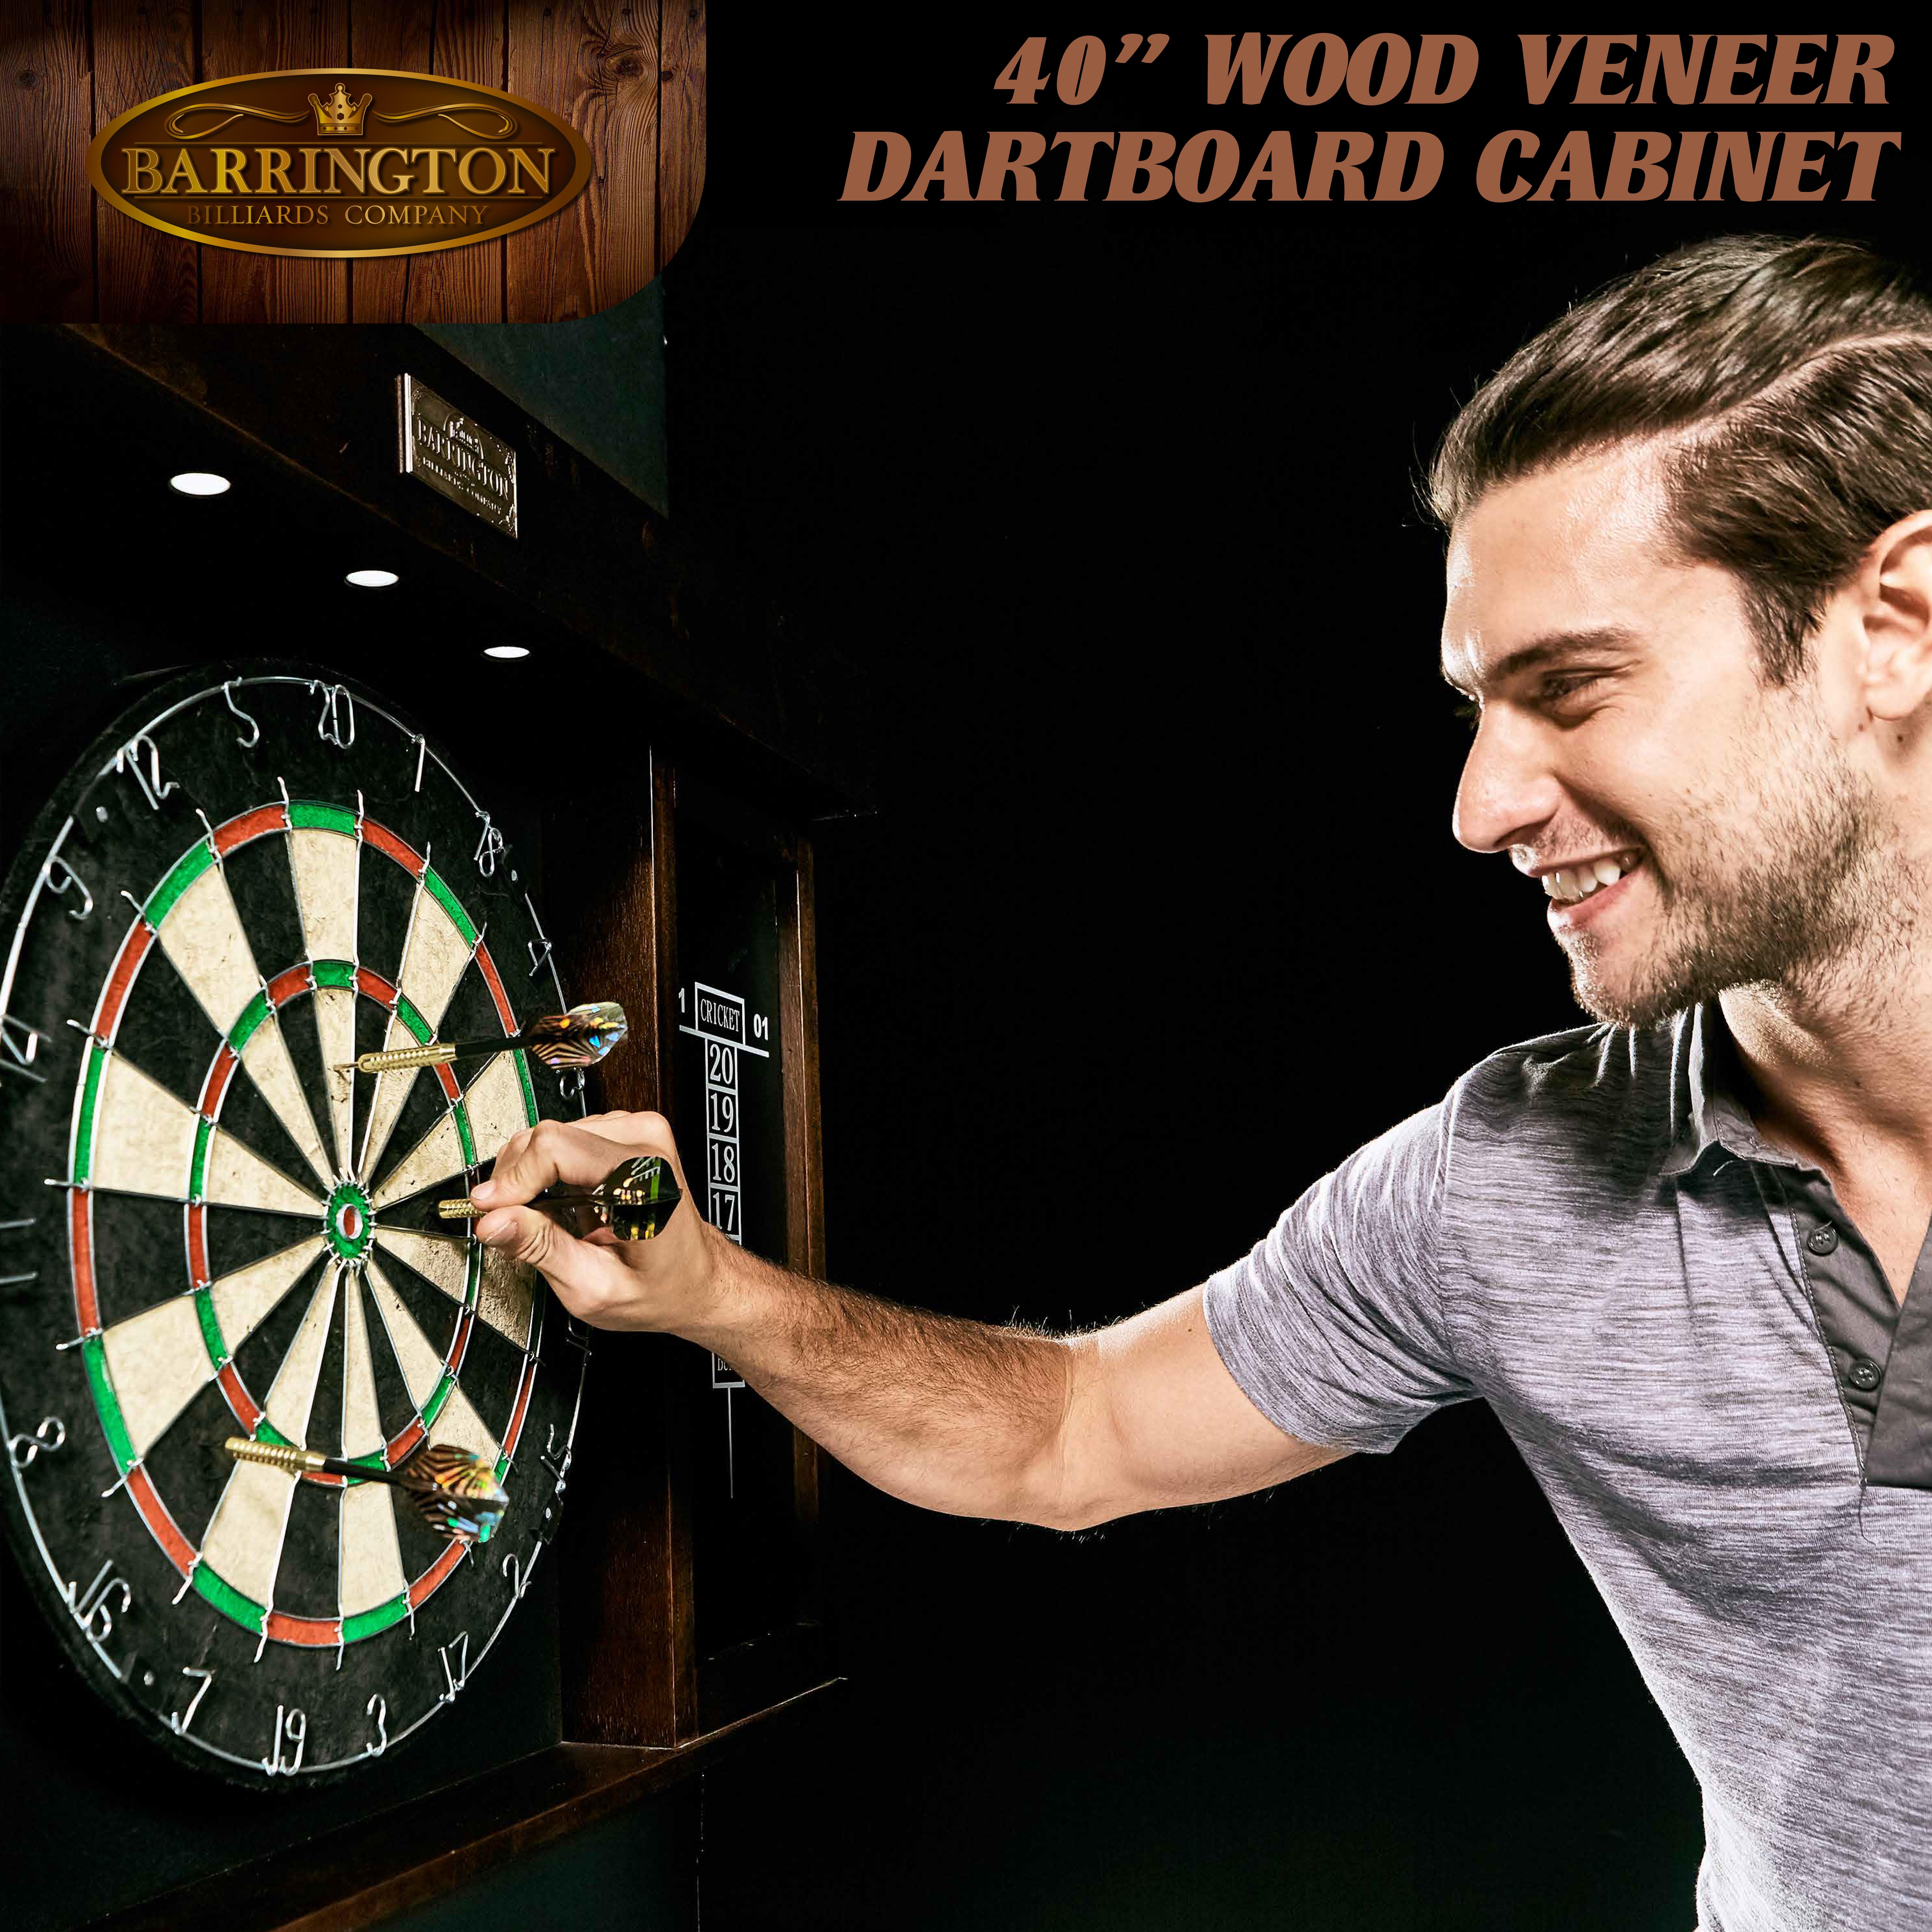 Barrington 40 inch Dartboard Cabinet with LED Lights, 40 inch x 4.375 inch x 24.625 inch - image 5 of 11